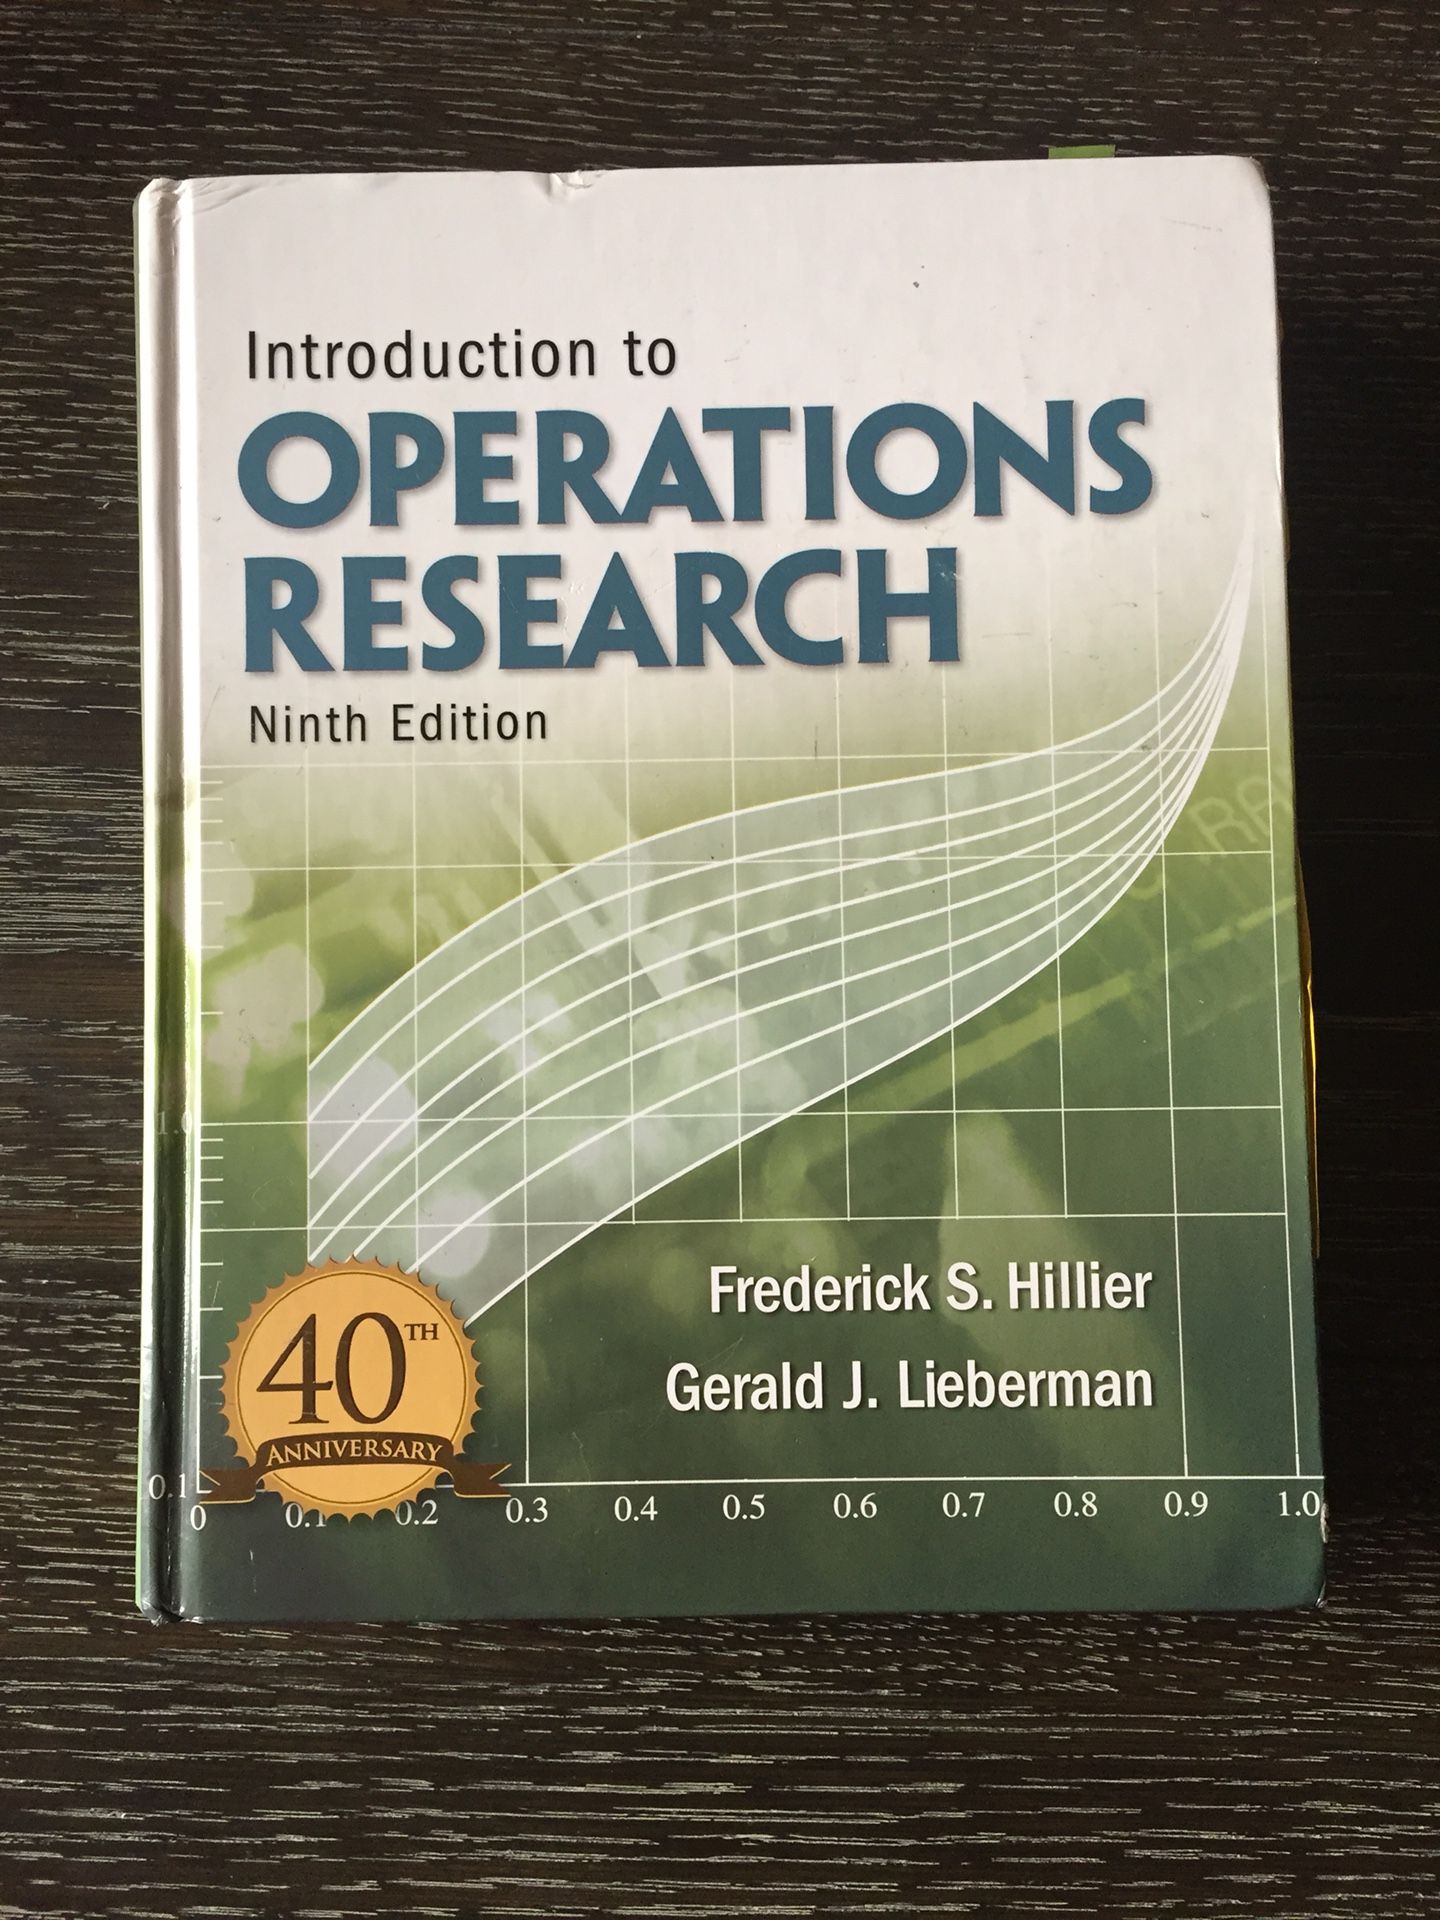 Introduction to Operation Research 9th Edition